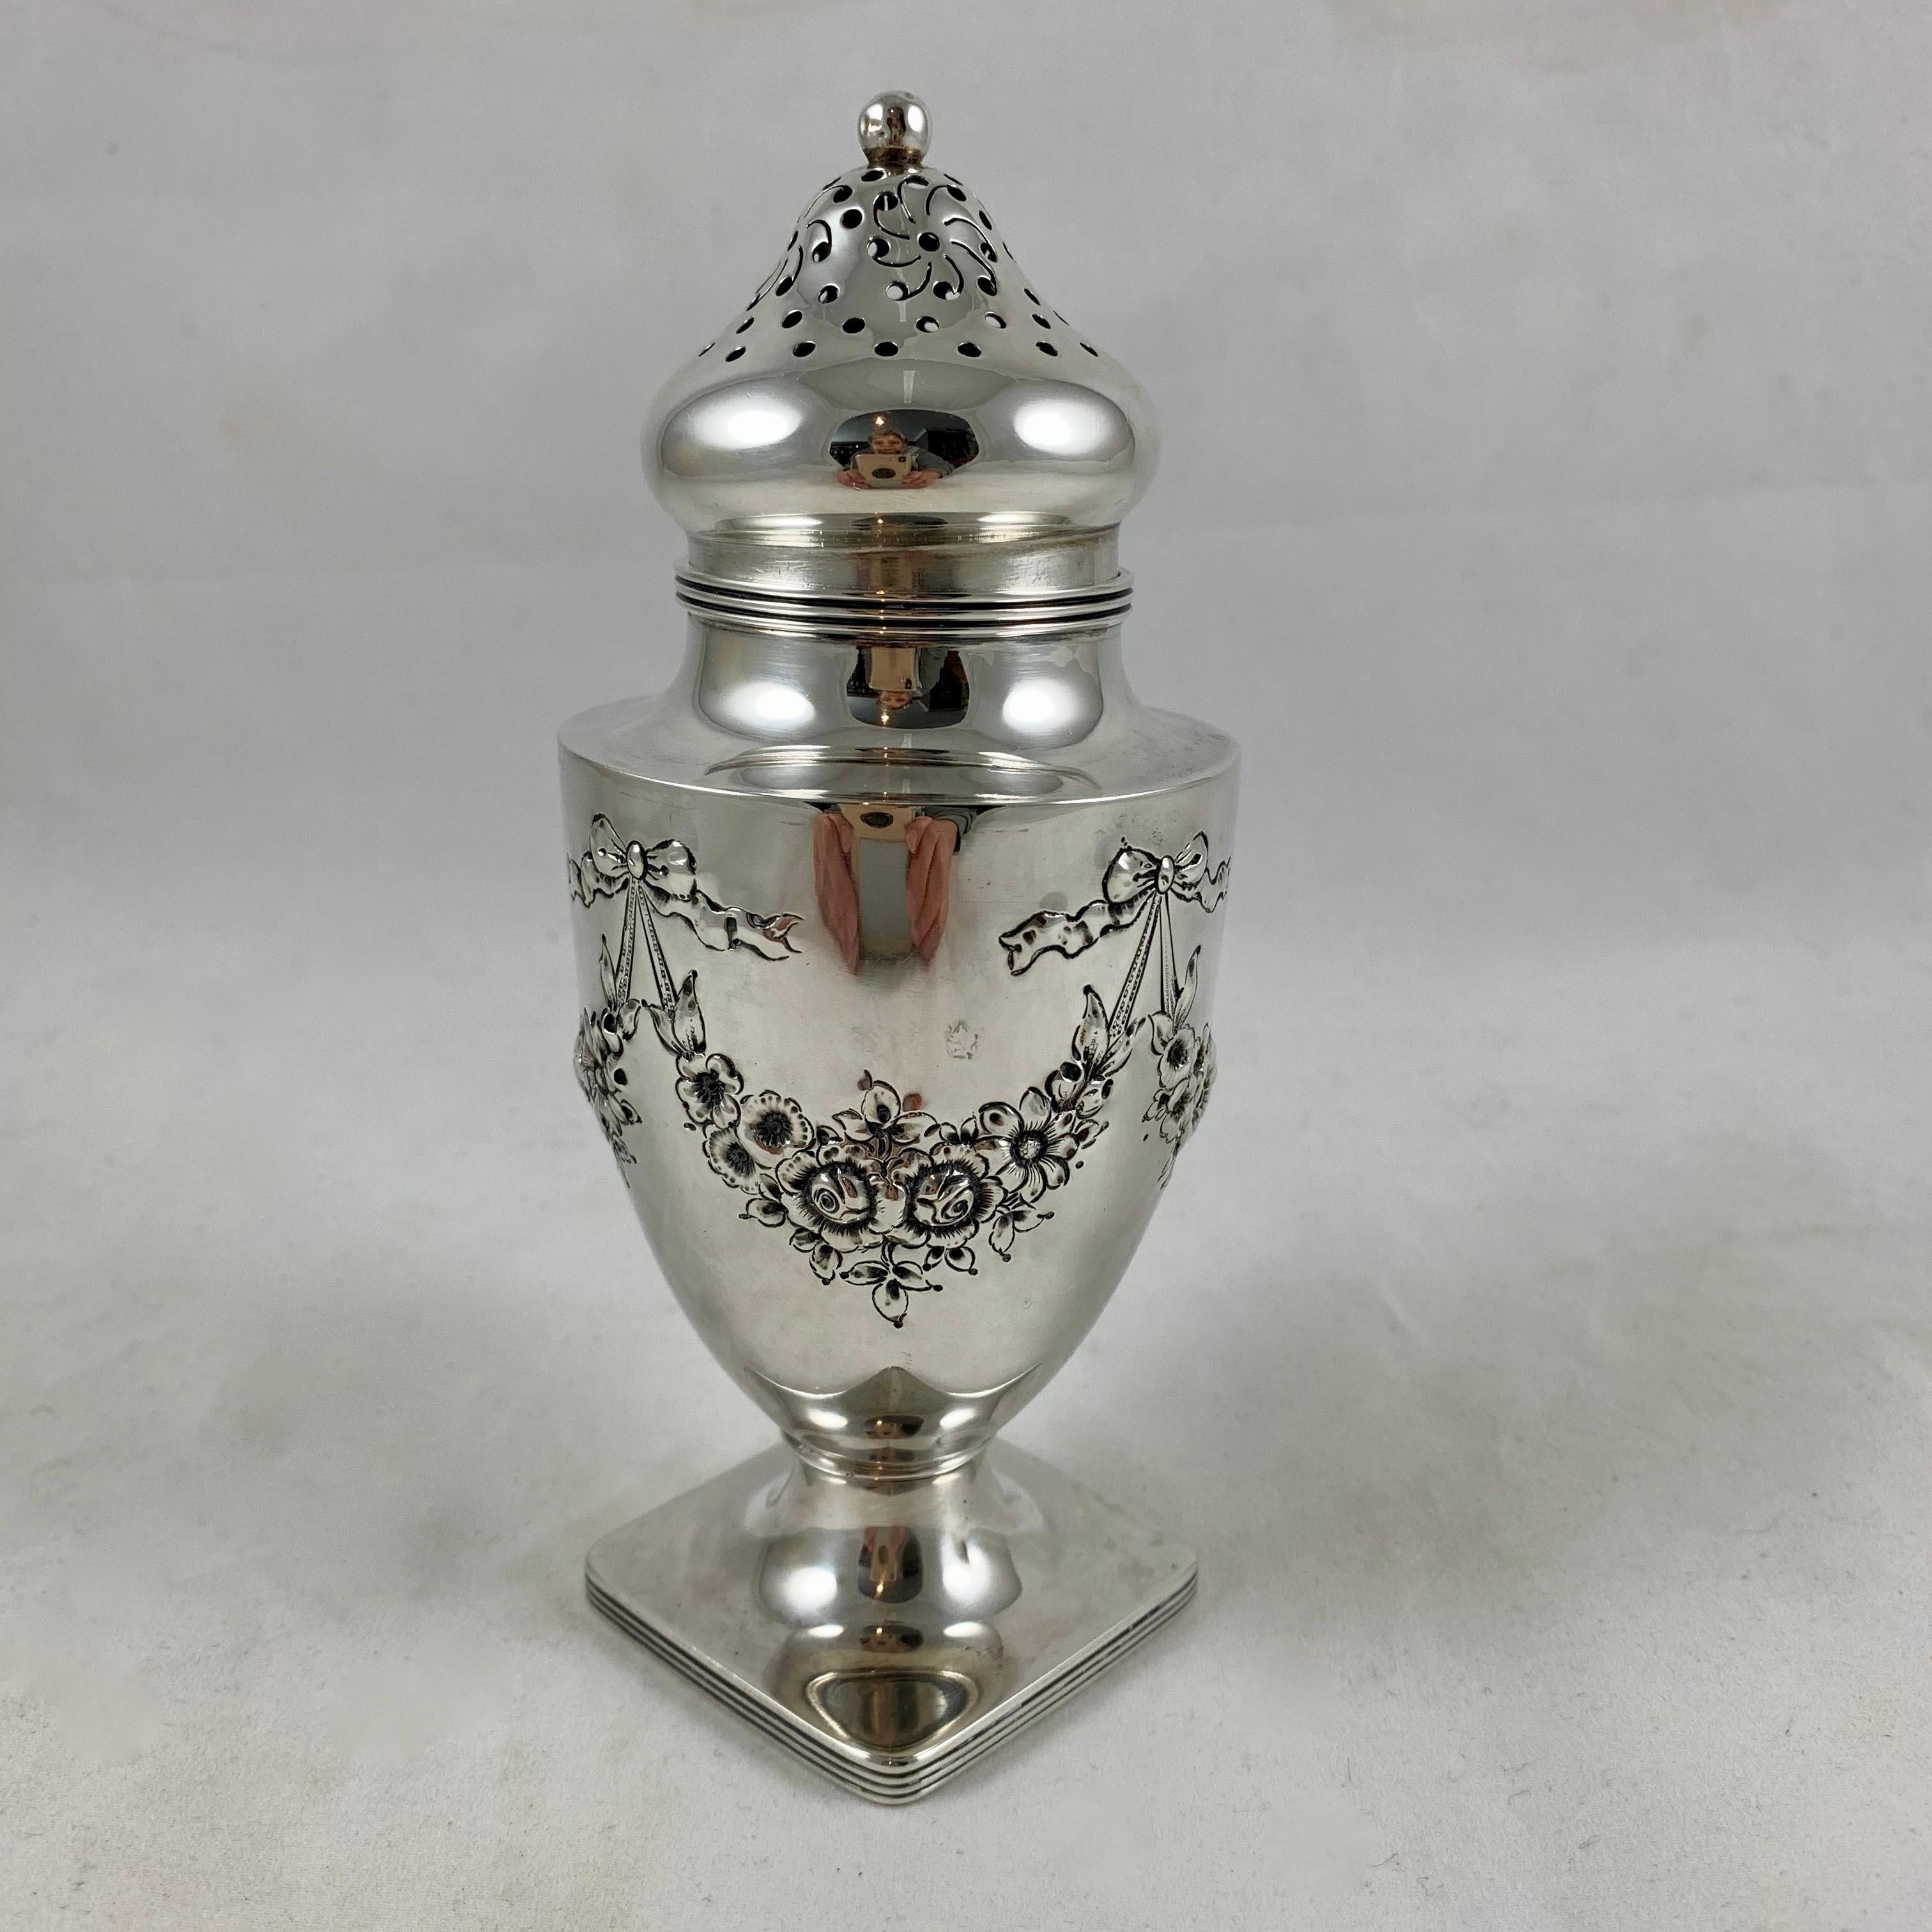 Hand-Crafted 19th Century American Lebkuechar & Co. Sterling Silver Floral & Bow Sugar Caster